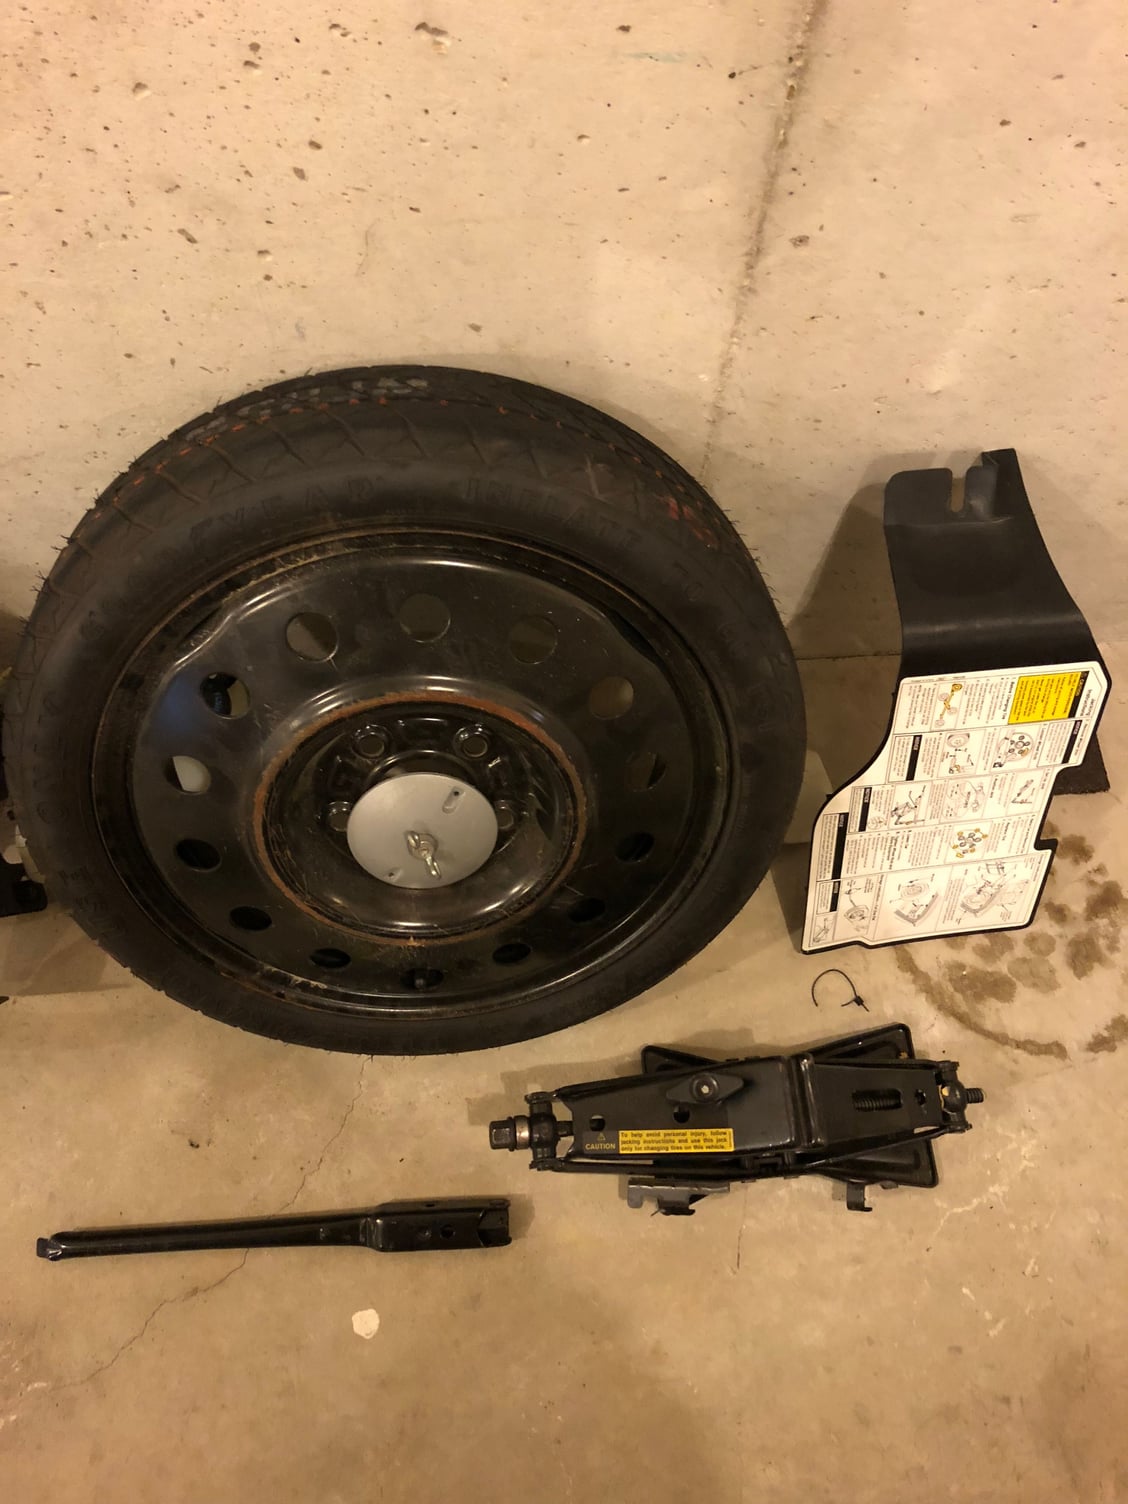  - Stock spare tire/jack kit - Holts Summit, MO 65043, United States